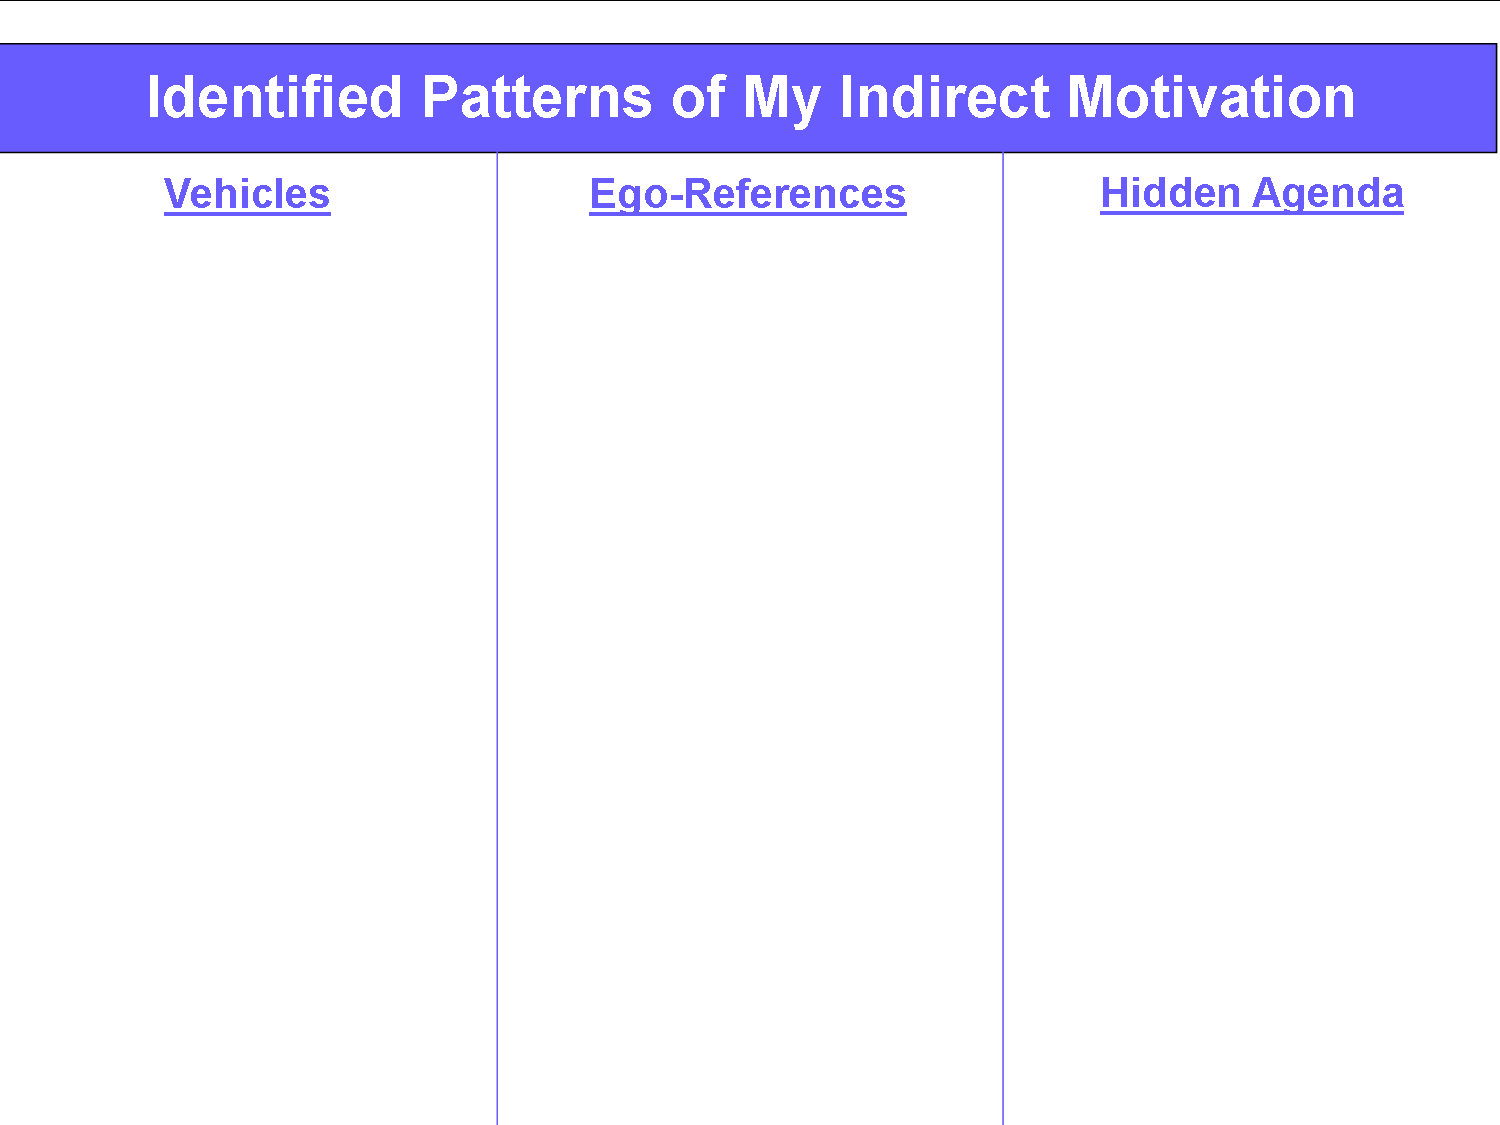 Identified pattersn of indirect motivation